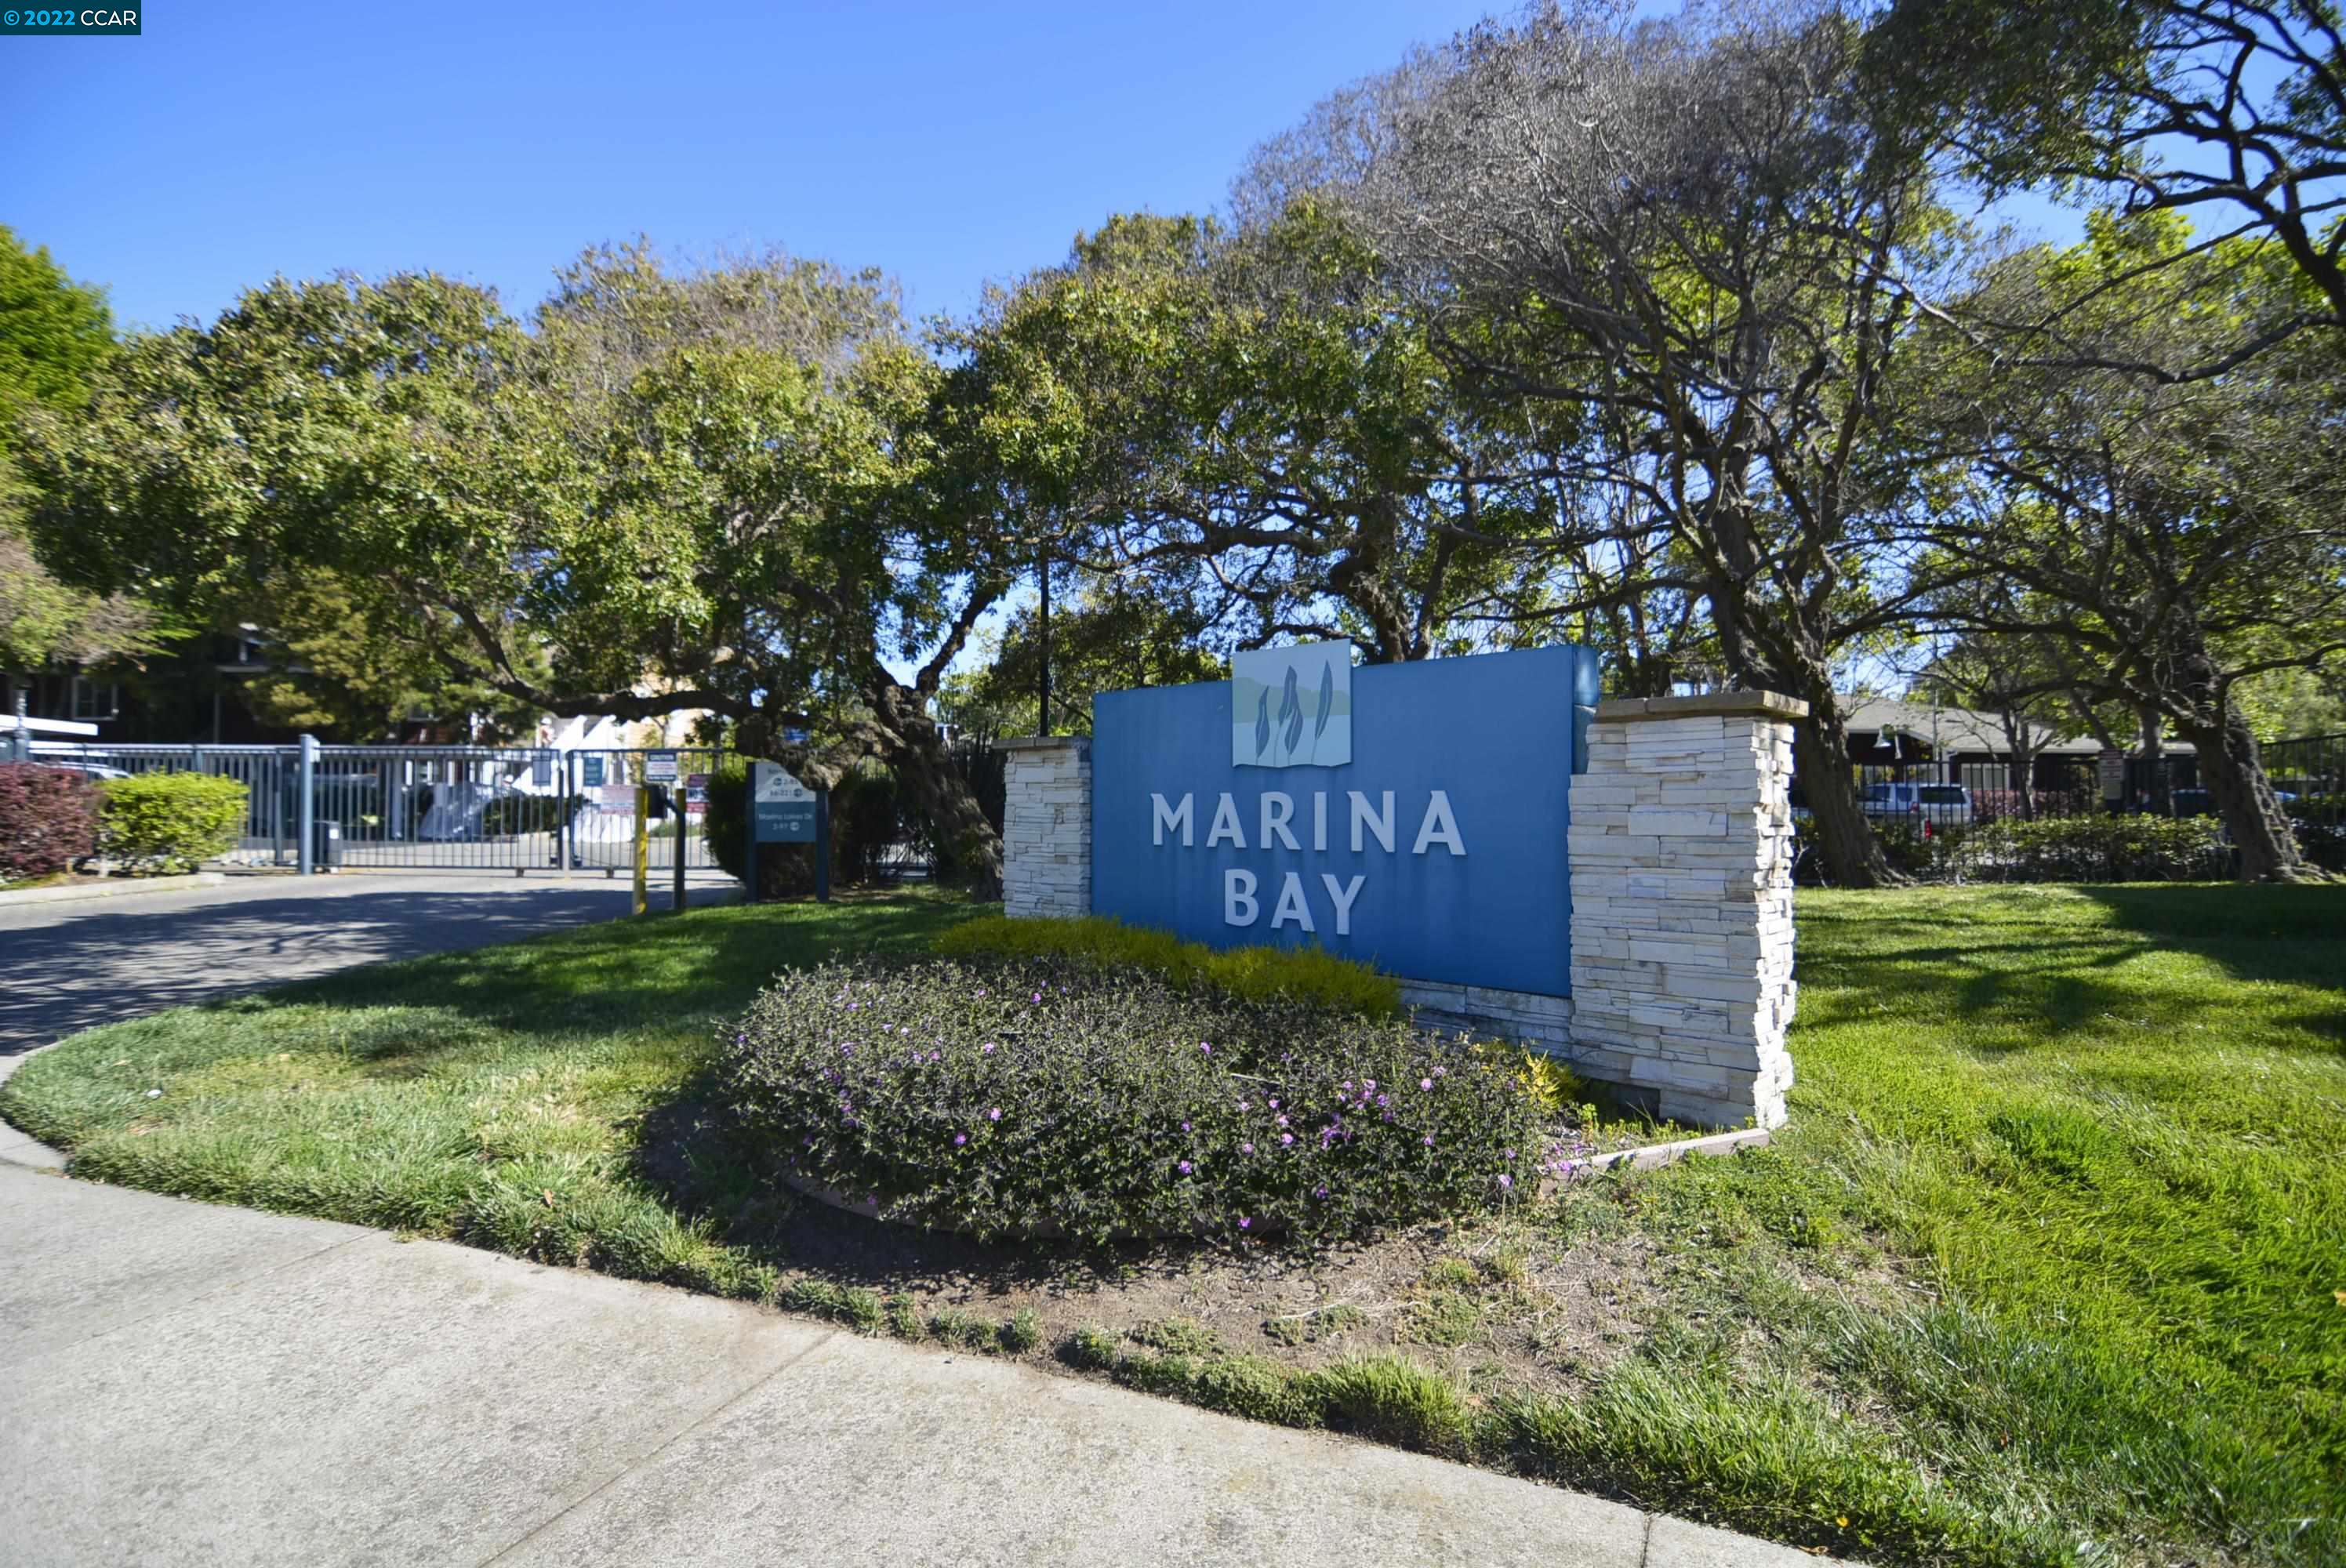 Enter into the beautifully maintained Marina Bay Community!Surrounded by lush grounds, ponds and lagoons with serene fountains, ample guest parking w/ E- charging station. Don't miss the opportunity to live the way you deserve! Within steps from this lovely unit you can enjoy fantastic amenities like a club house, swimming pools, gym, spa and illuminated tennis courts. For a life style with more adventure this location offers opportunity for cycling, sailing, running or just sitting back and enjoying the peaceful views and sounds in Marina Bay. Easy access to 580-80 freeways, SF/Oakland/Berkeley/Marina Bart Stations & ferry to SF. This is a lovely 2 Bedroom/2 Full baths unit, second bedroom has a Murphy bed for the convenience of having a working space at home, an inviting layout with high ceilings, private patio & in-unit laundry. Must See! Don't miss out!